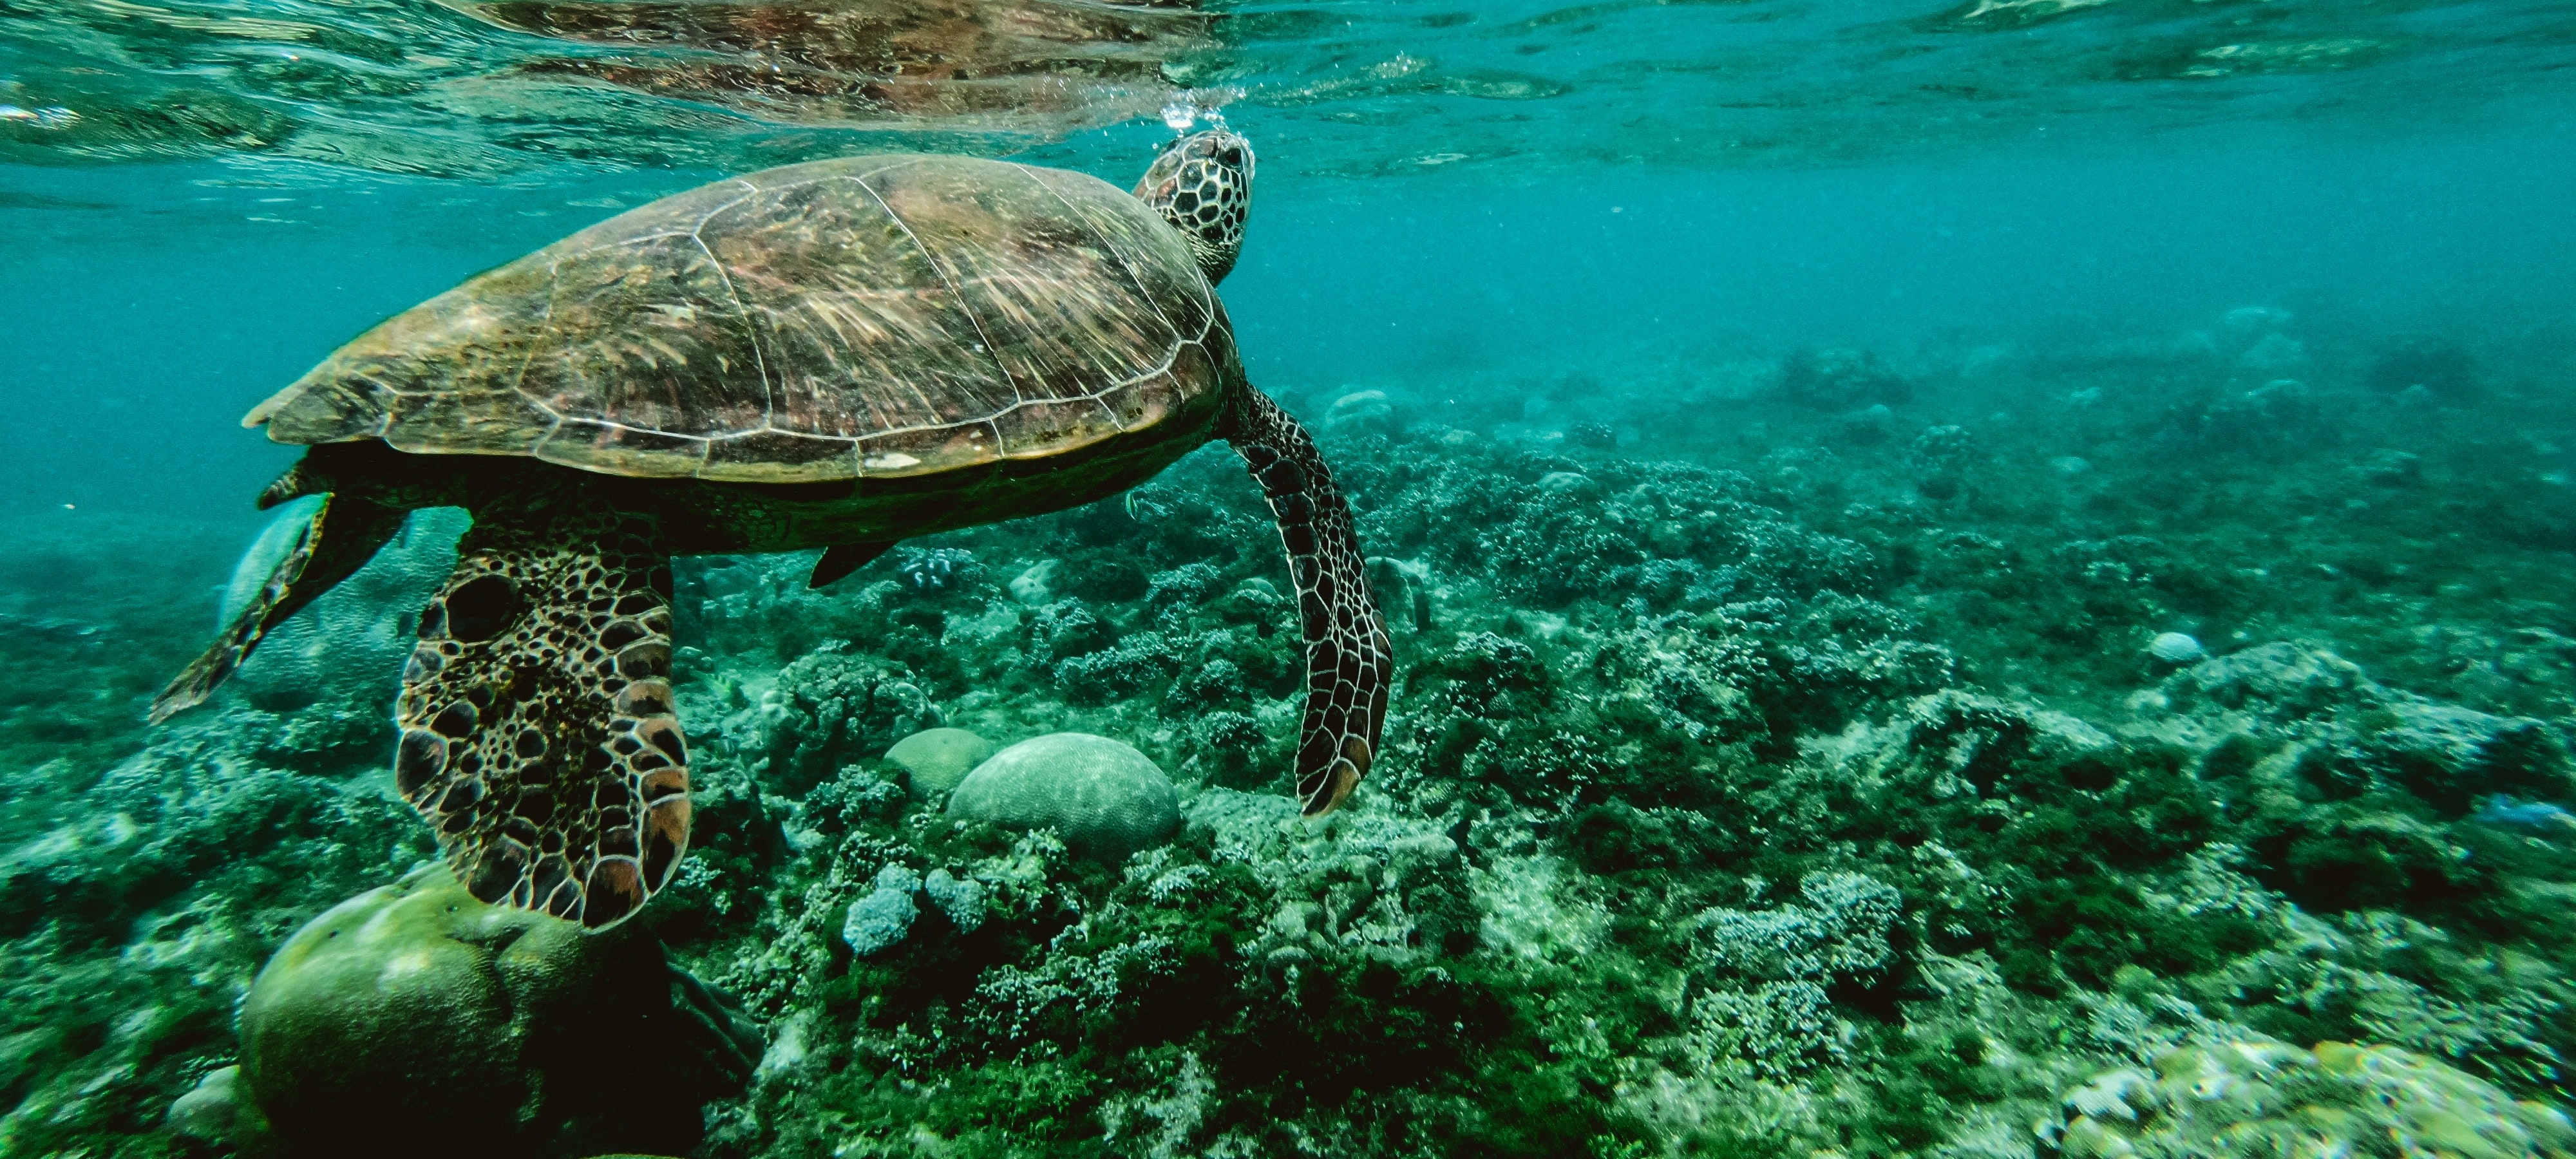 Underwater image of a sea turtle swimming